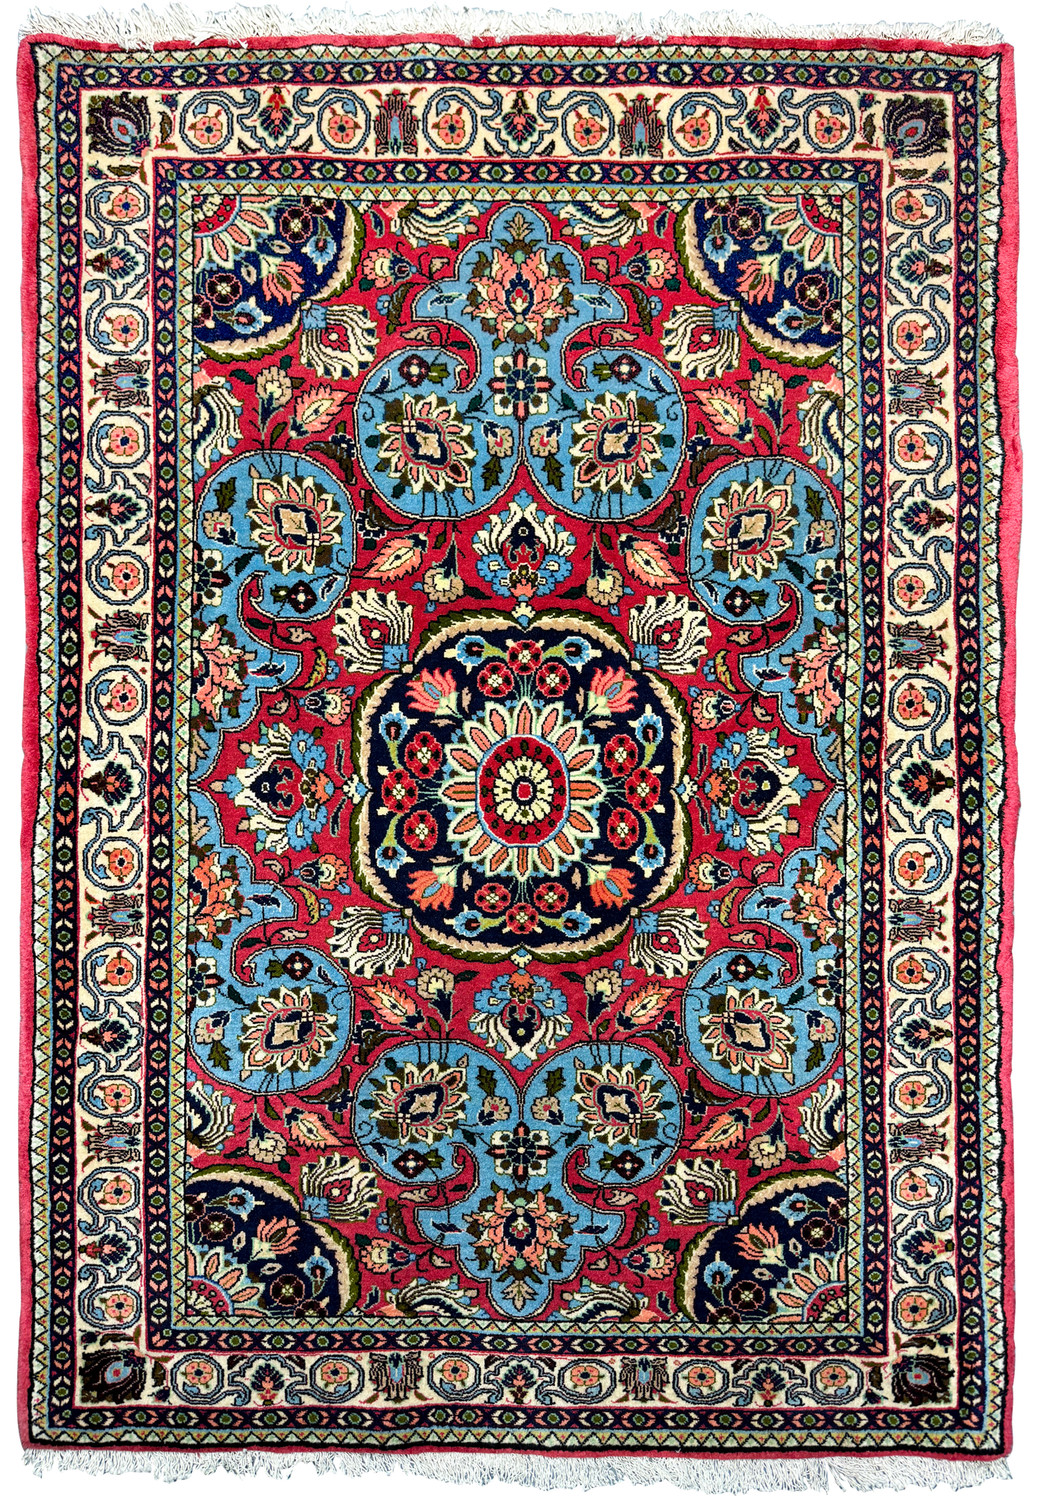 Full view of a Persian Bijar rug showcasing rich red and navy blue colors with detailed floral and medallion patterns on a 3'7" x 5'2" size, perfect for collectors of handmade wool rugs